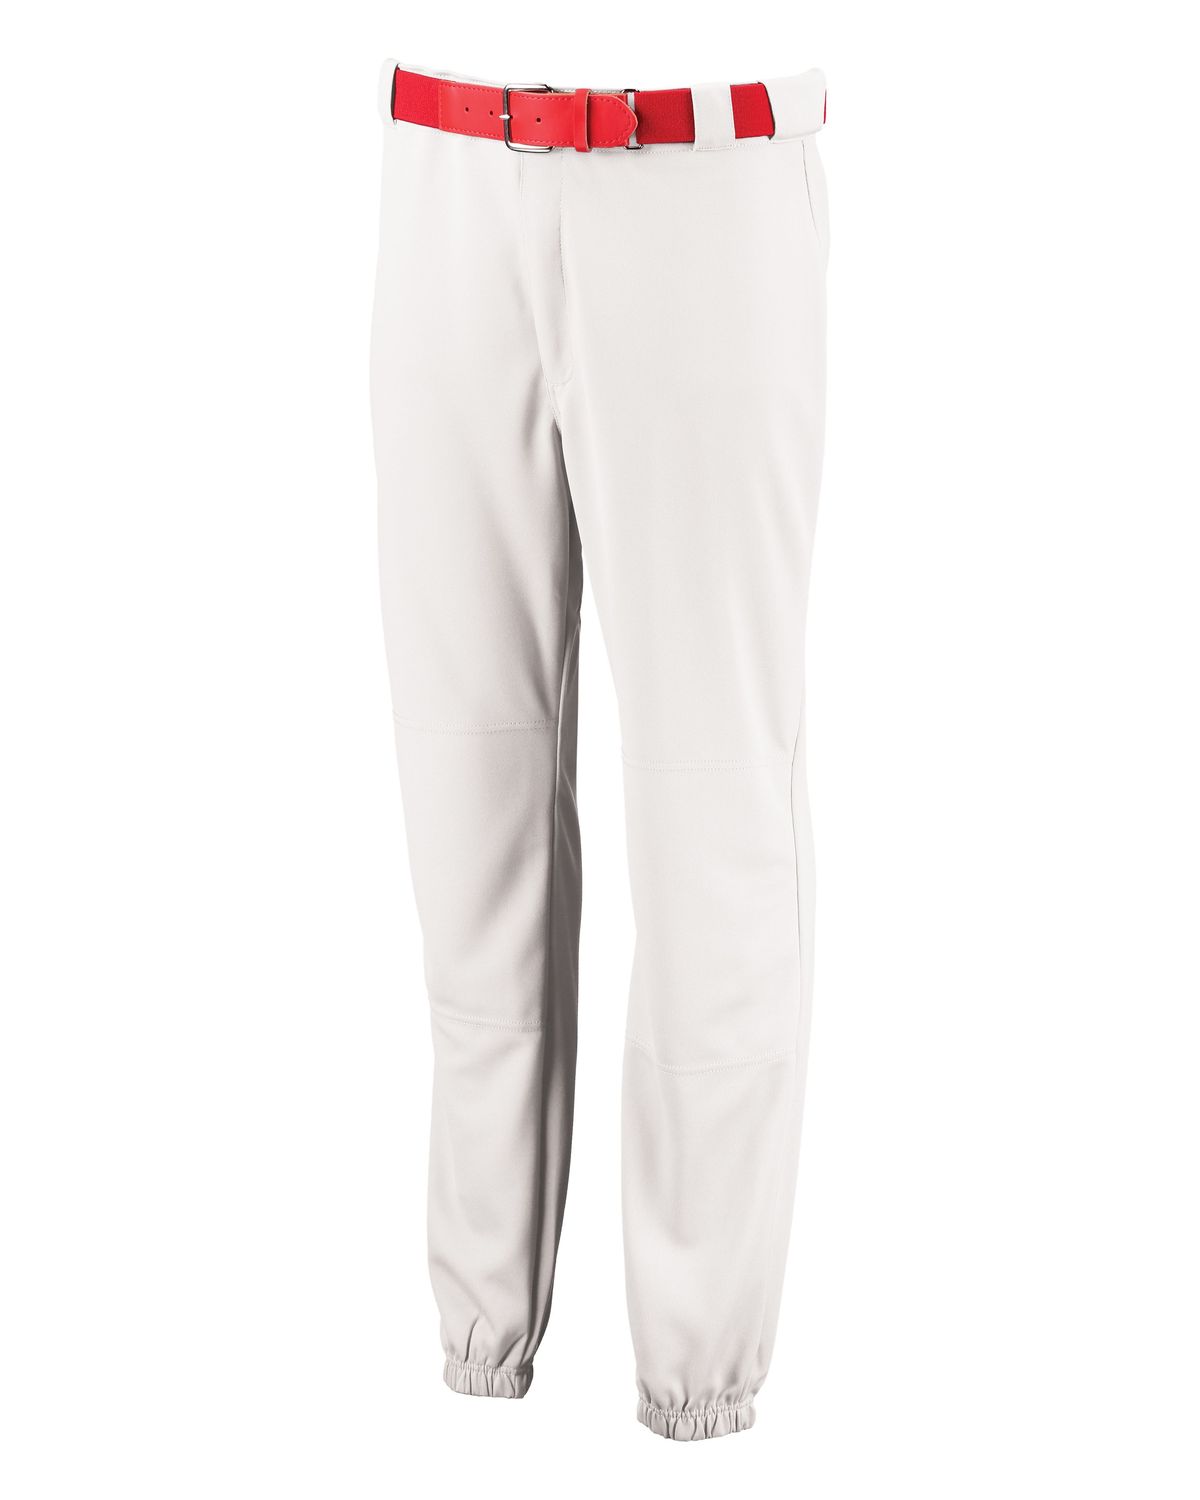 'Russell 236DBM Baseball Game Pant'